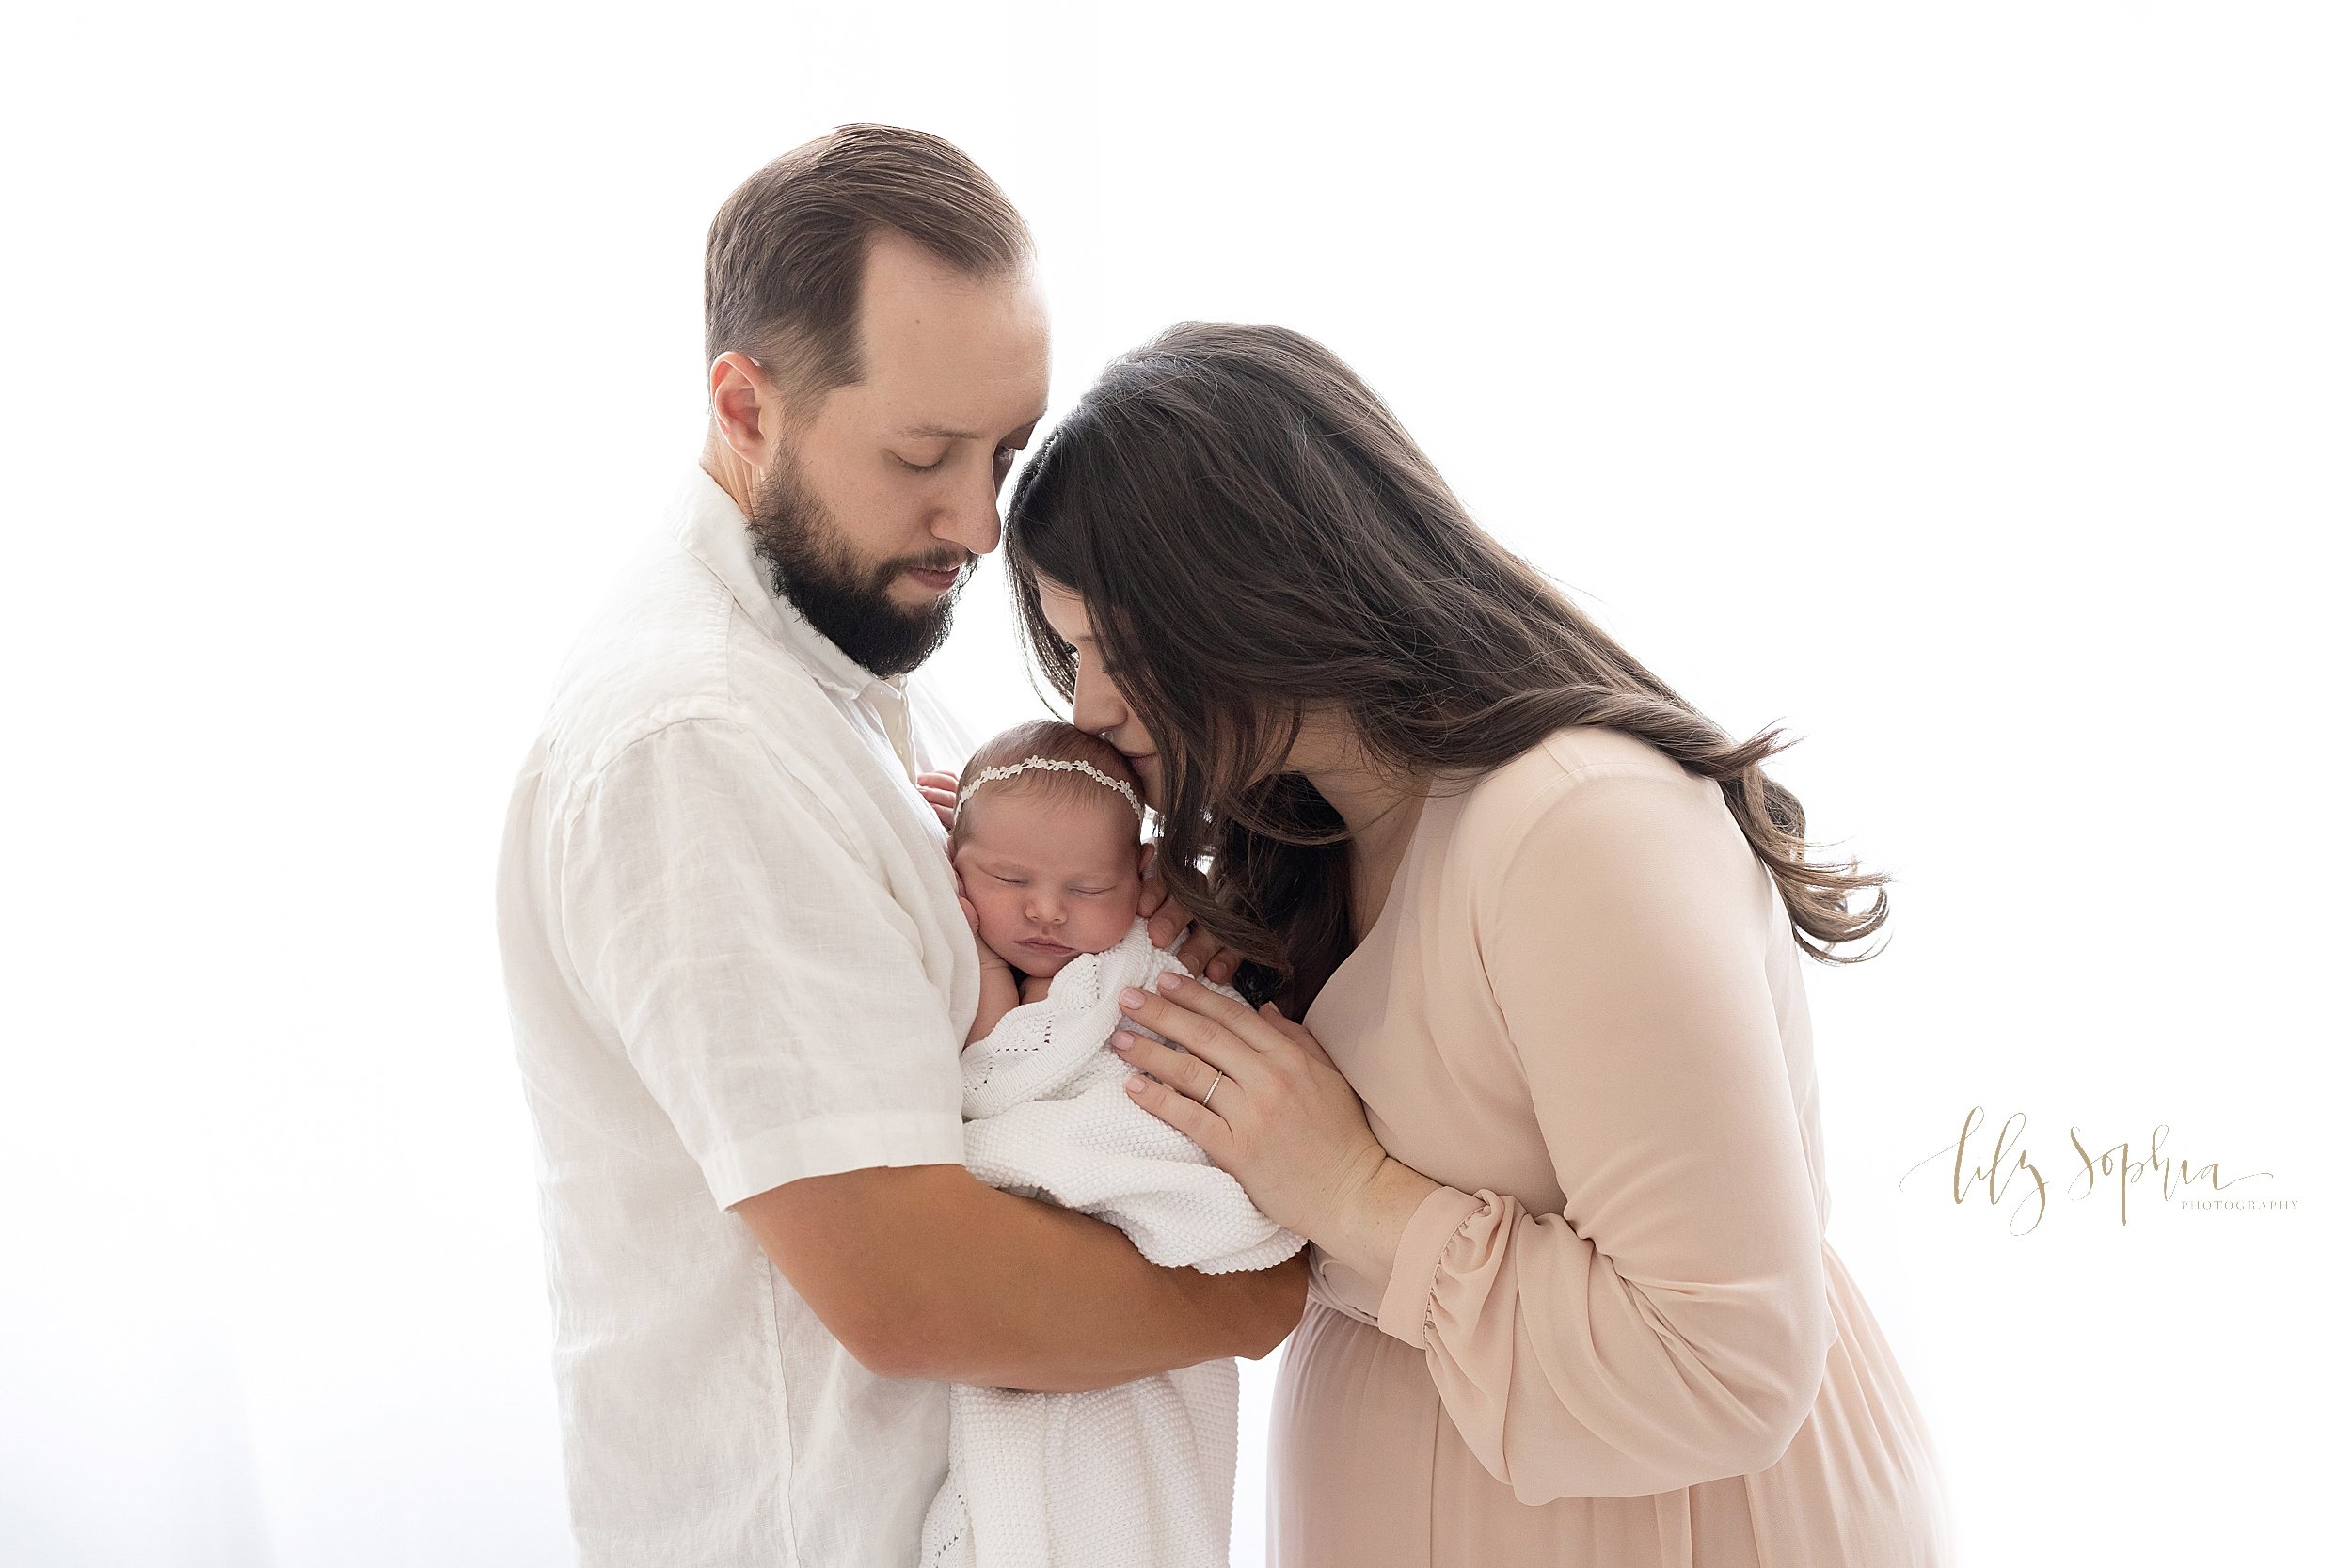  Newborn photo session with a father holding his newborn baby girl in his arms as she sleeps against his chest while mom faces dad and kisses their daughter on the crown of her head taken in front of a window streaming natural light in a studio near 